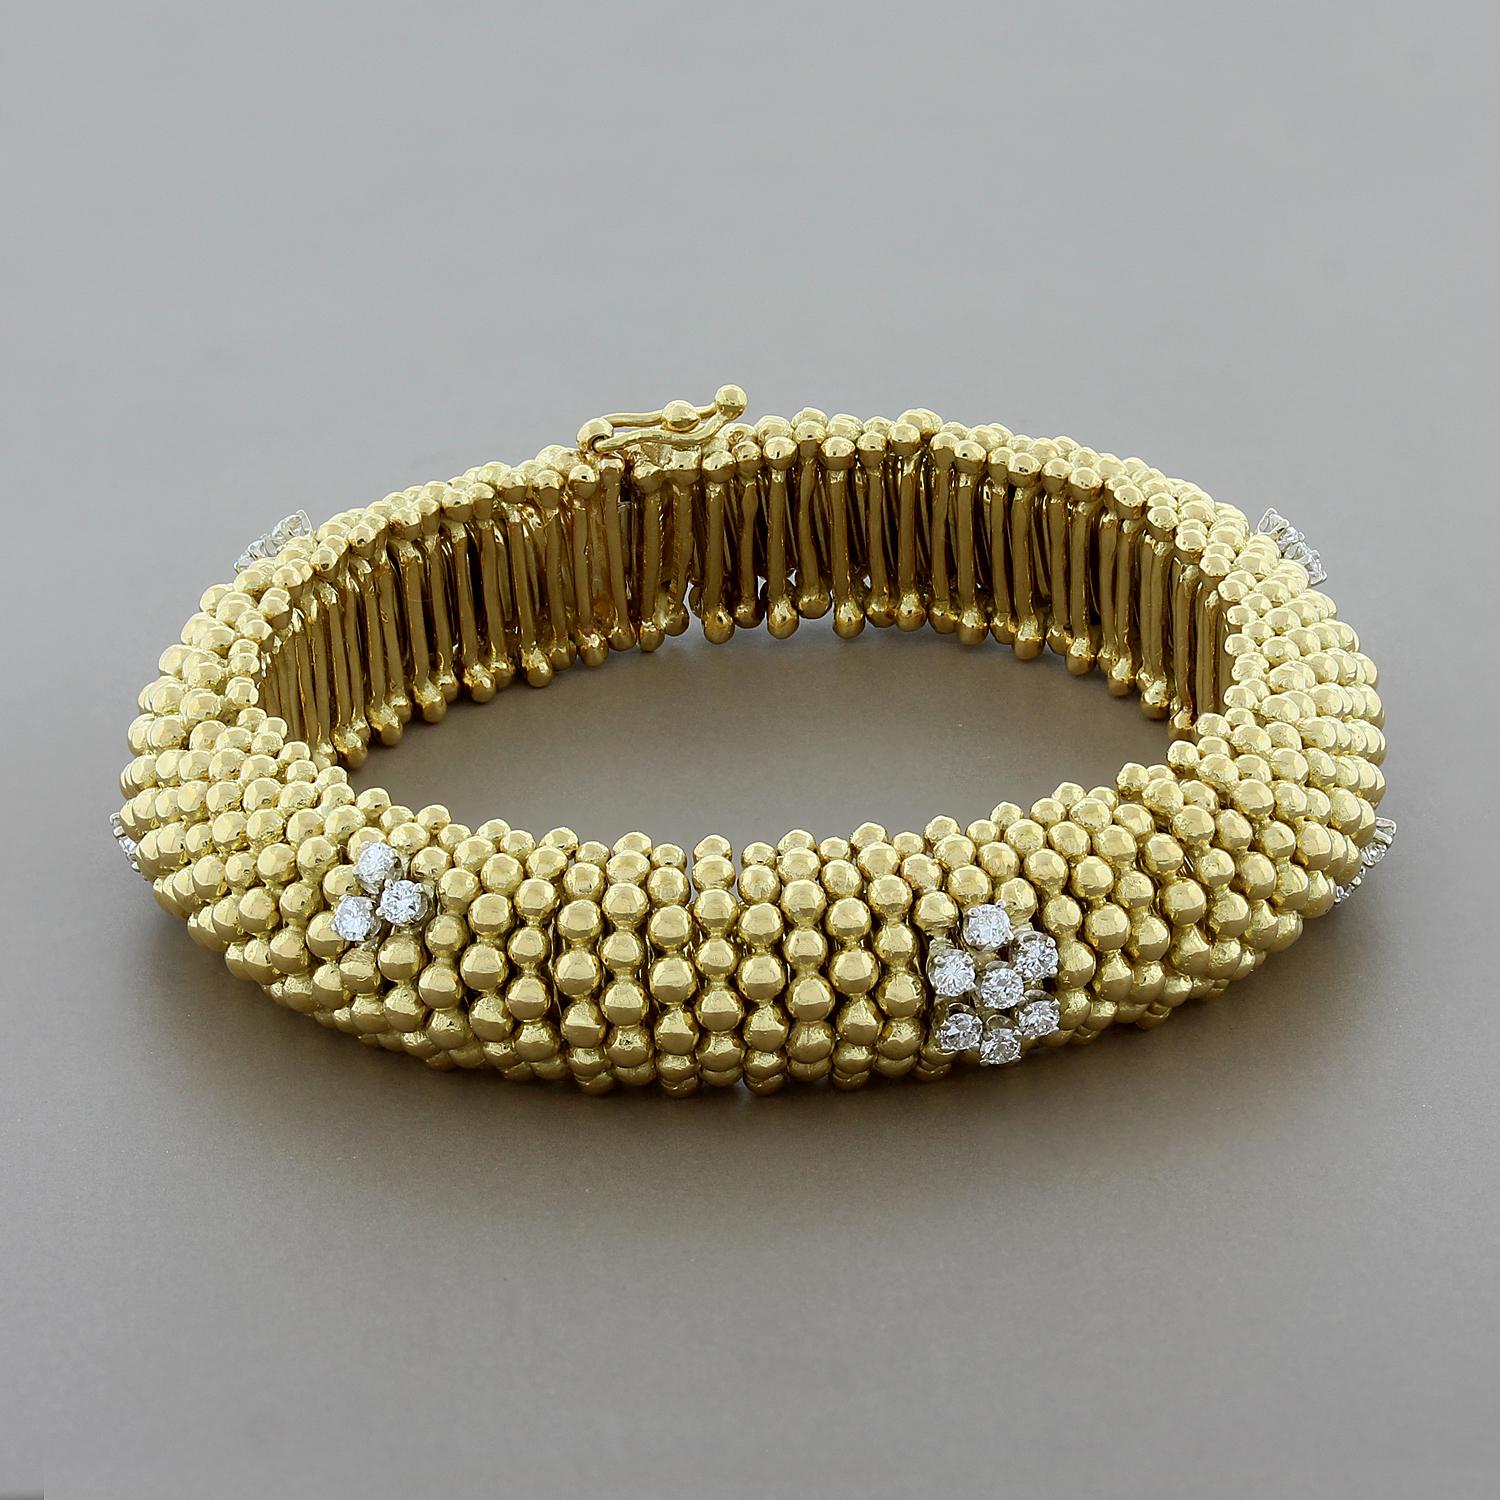 This estate bracelet features 0.64 carats of round cut diamonds throughout. The diamonds create clusters over the gold bead design with one flower cluster in the center. This bracelet has been masterfully crafted with detail even on the inside - it